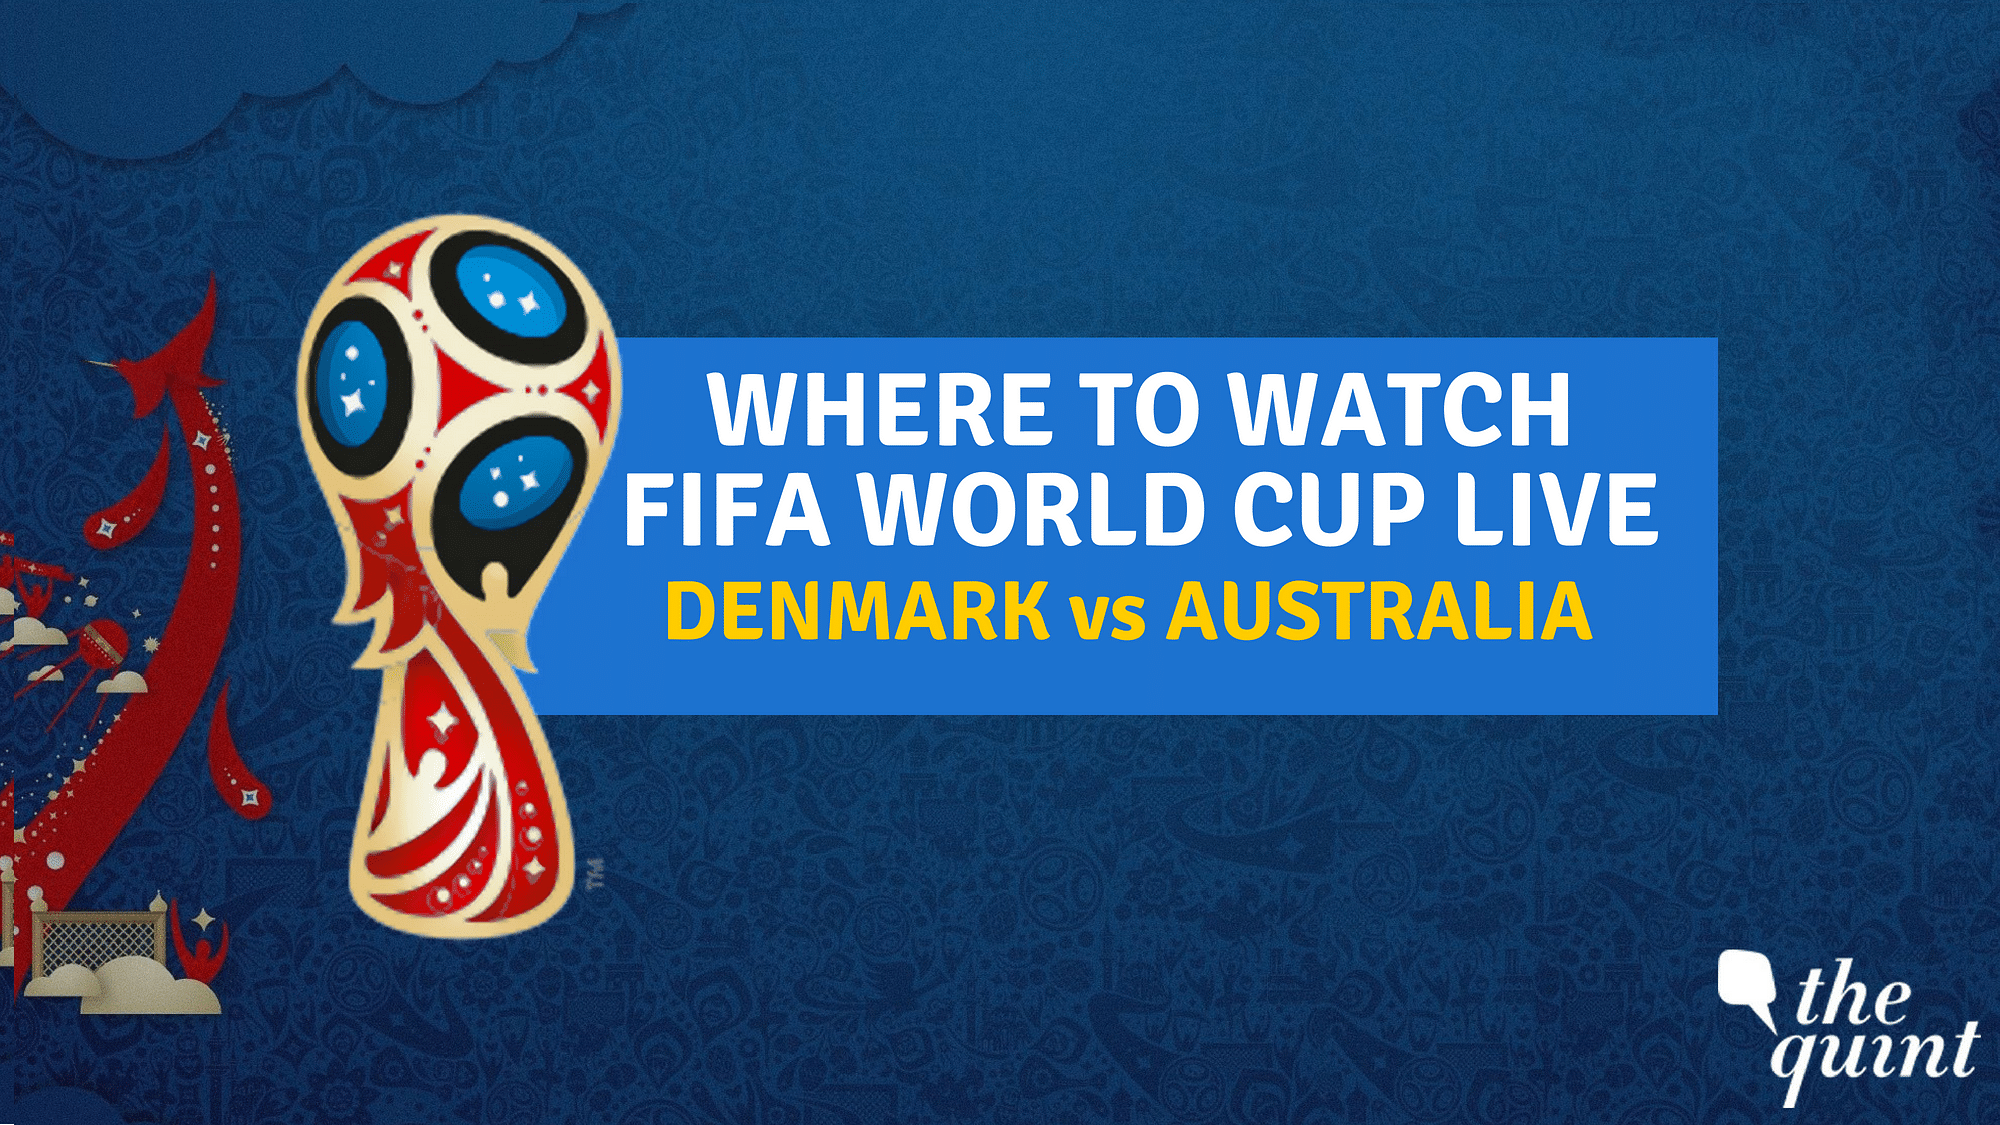 Denmark vs Australia, FIFA World Cup 2018 Group C Match will be played on 21 June.